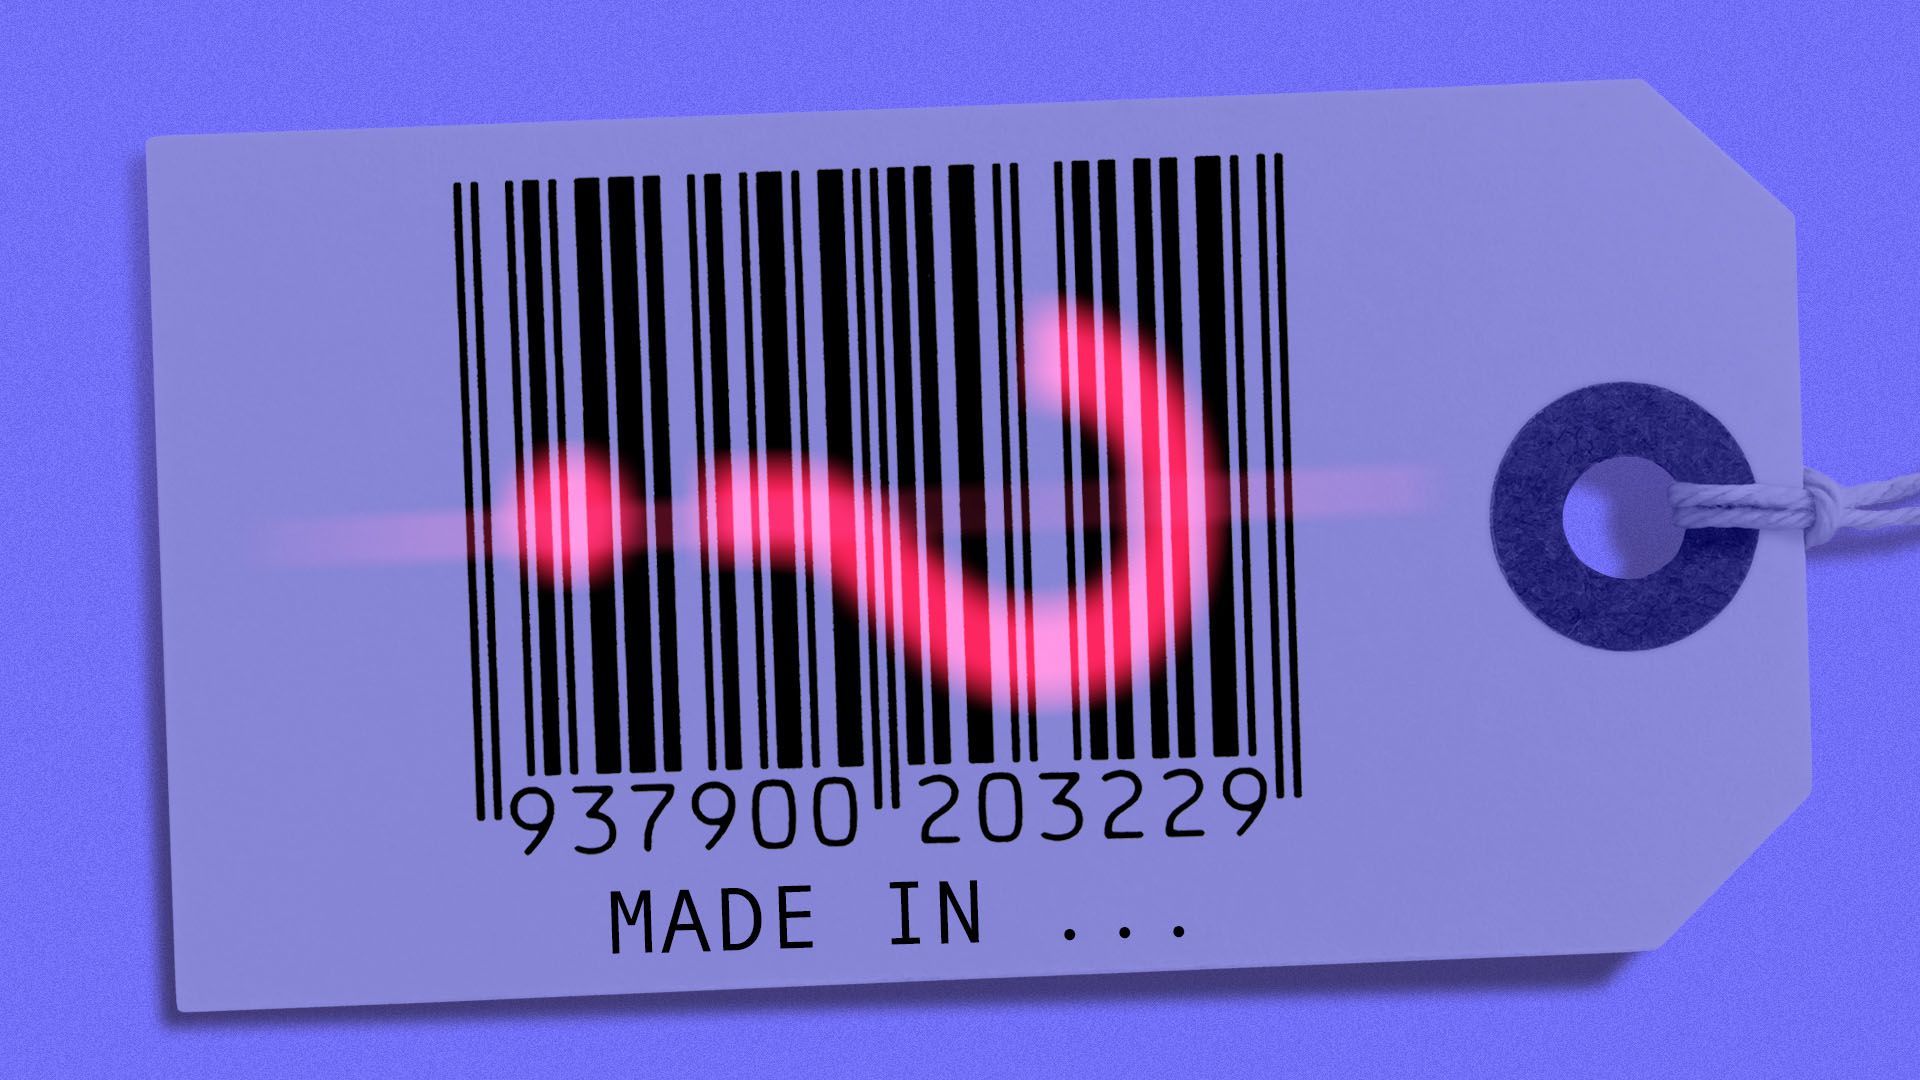 Illustration of a barcode on a tag with a laser beam in the shape of a question mark